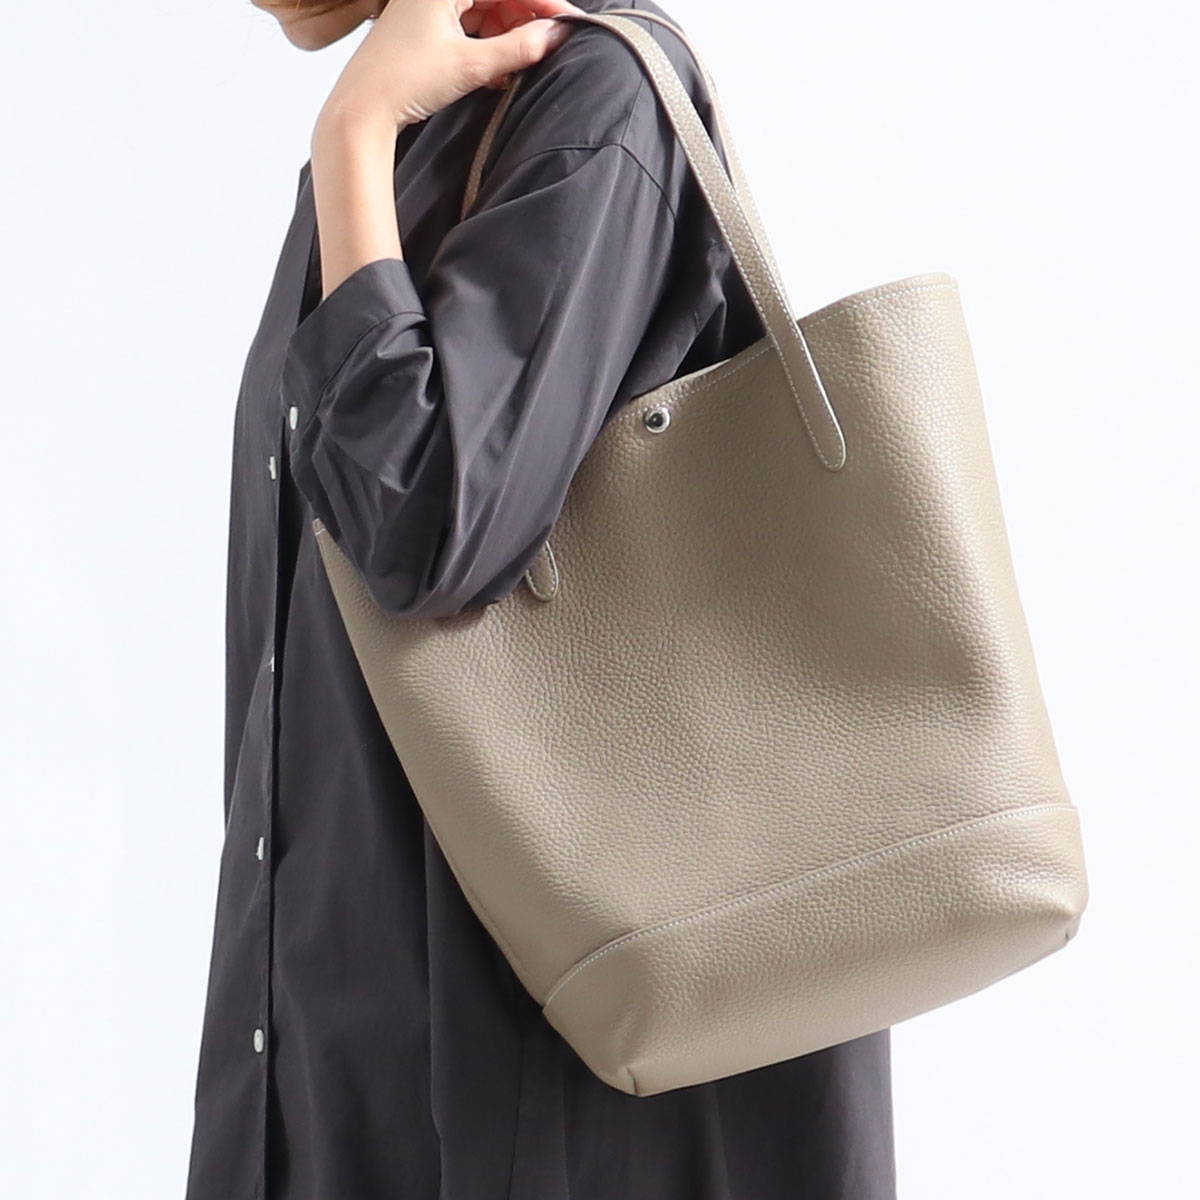 blancle ブランクレ S.LEATHER VERTICAL TOTE L トートバッグ bl-1020